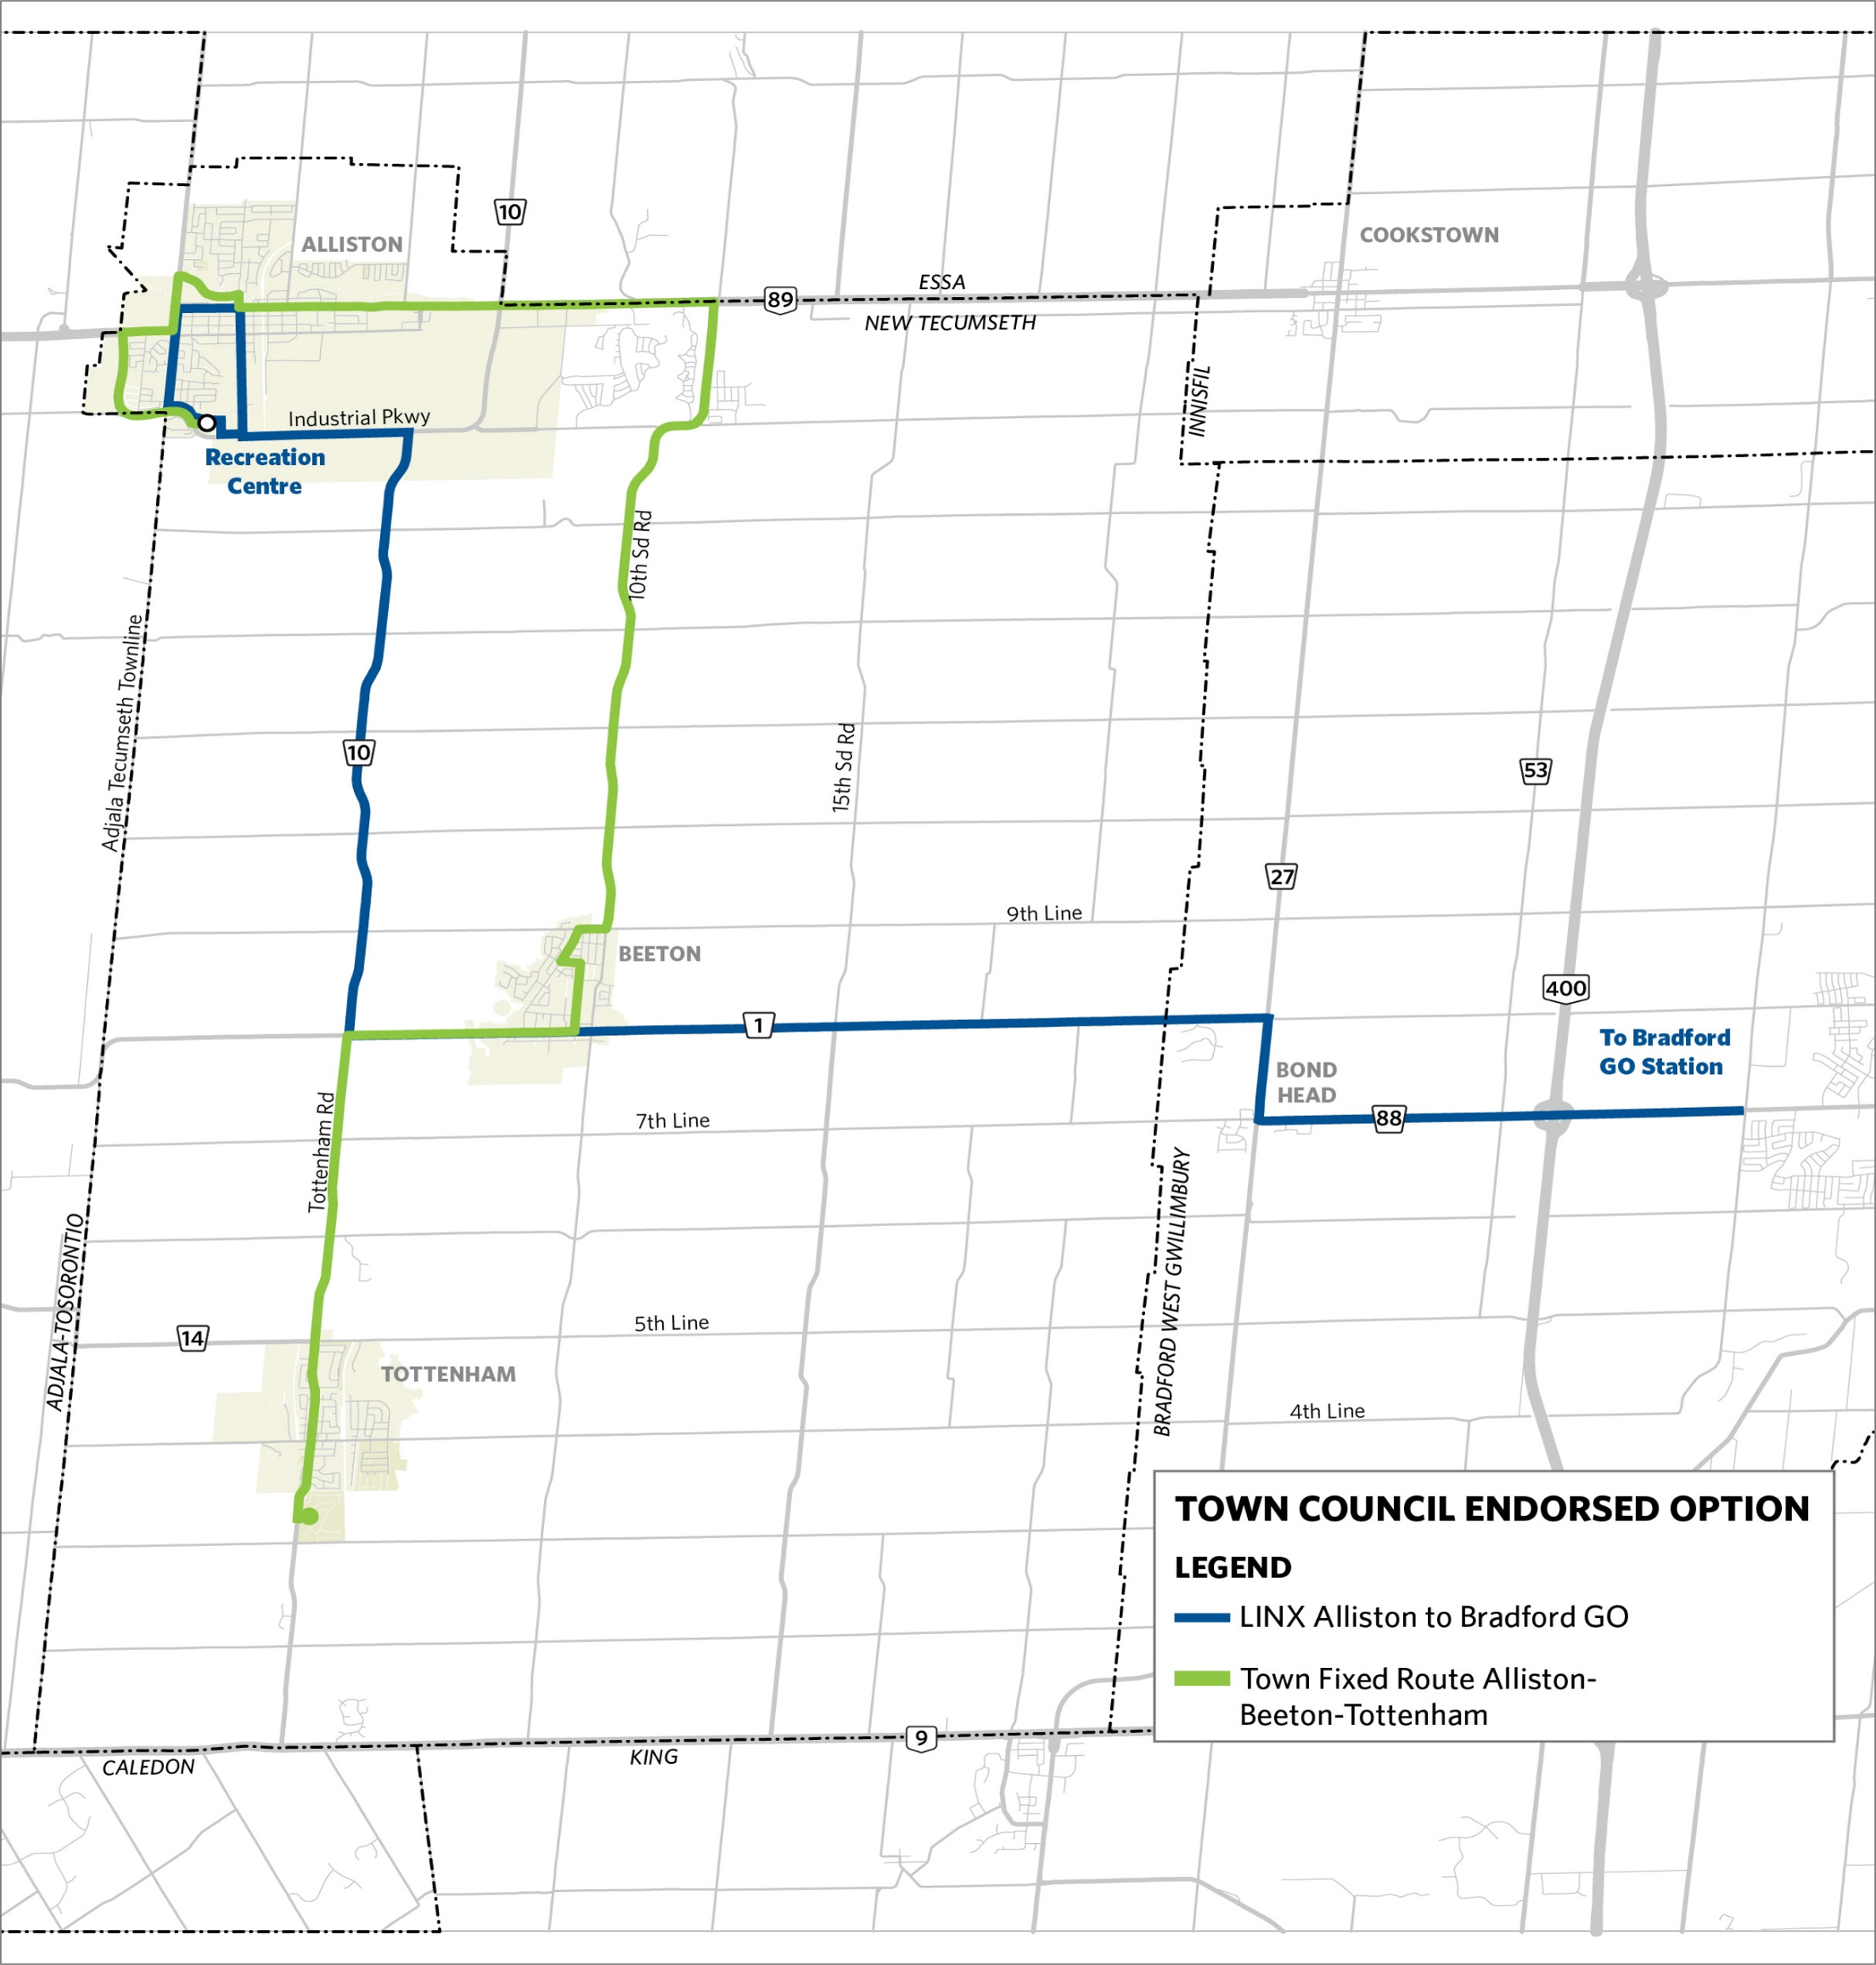 This map illustrates the Preliminary Route for fixed route transit service connecting Alliston, Beeton and Tottenham.